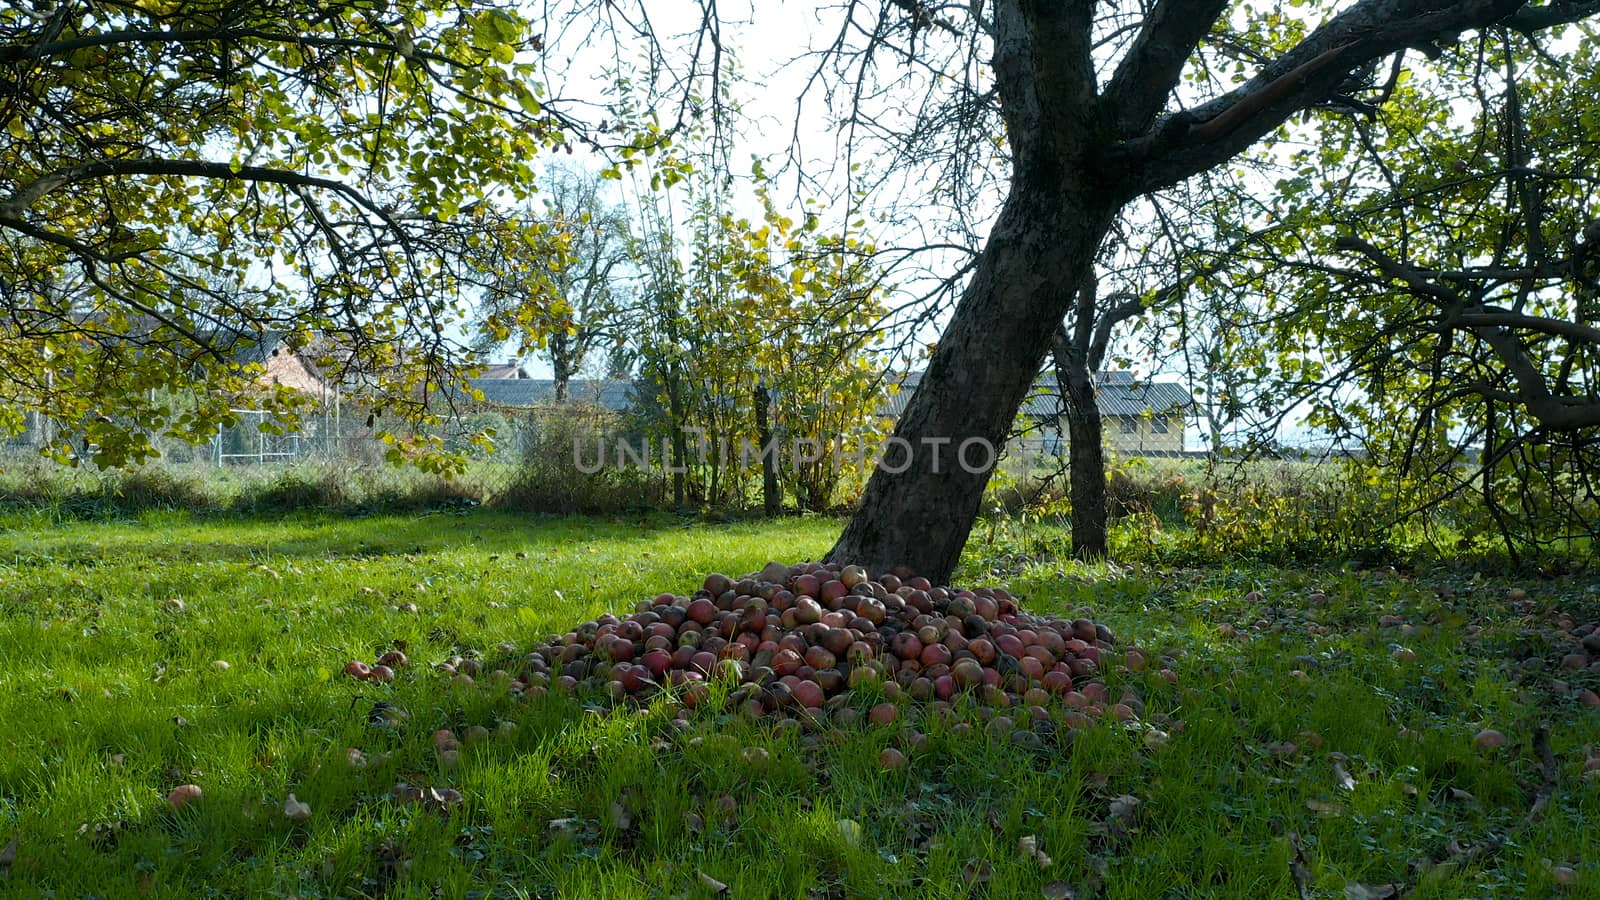 Pile of apples beneath an apple tree in an orchard by asafaric